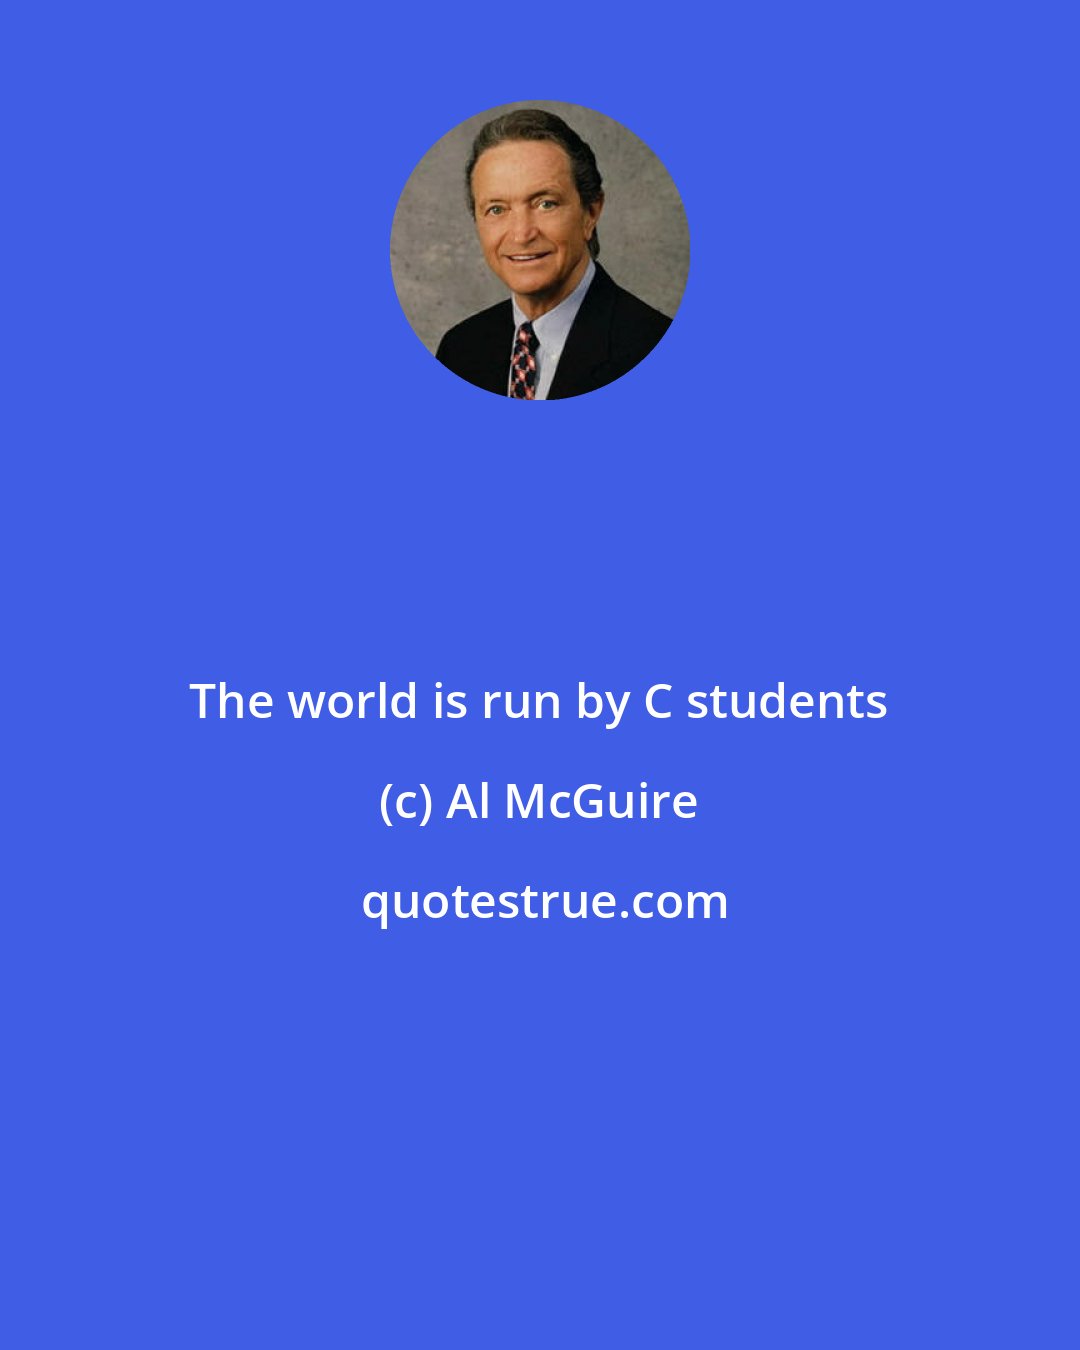 Al McGuire: The world is run by C students